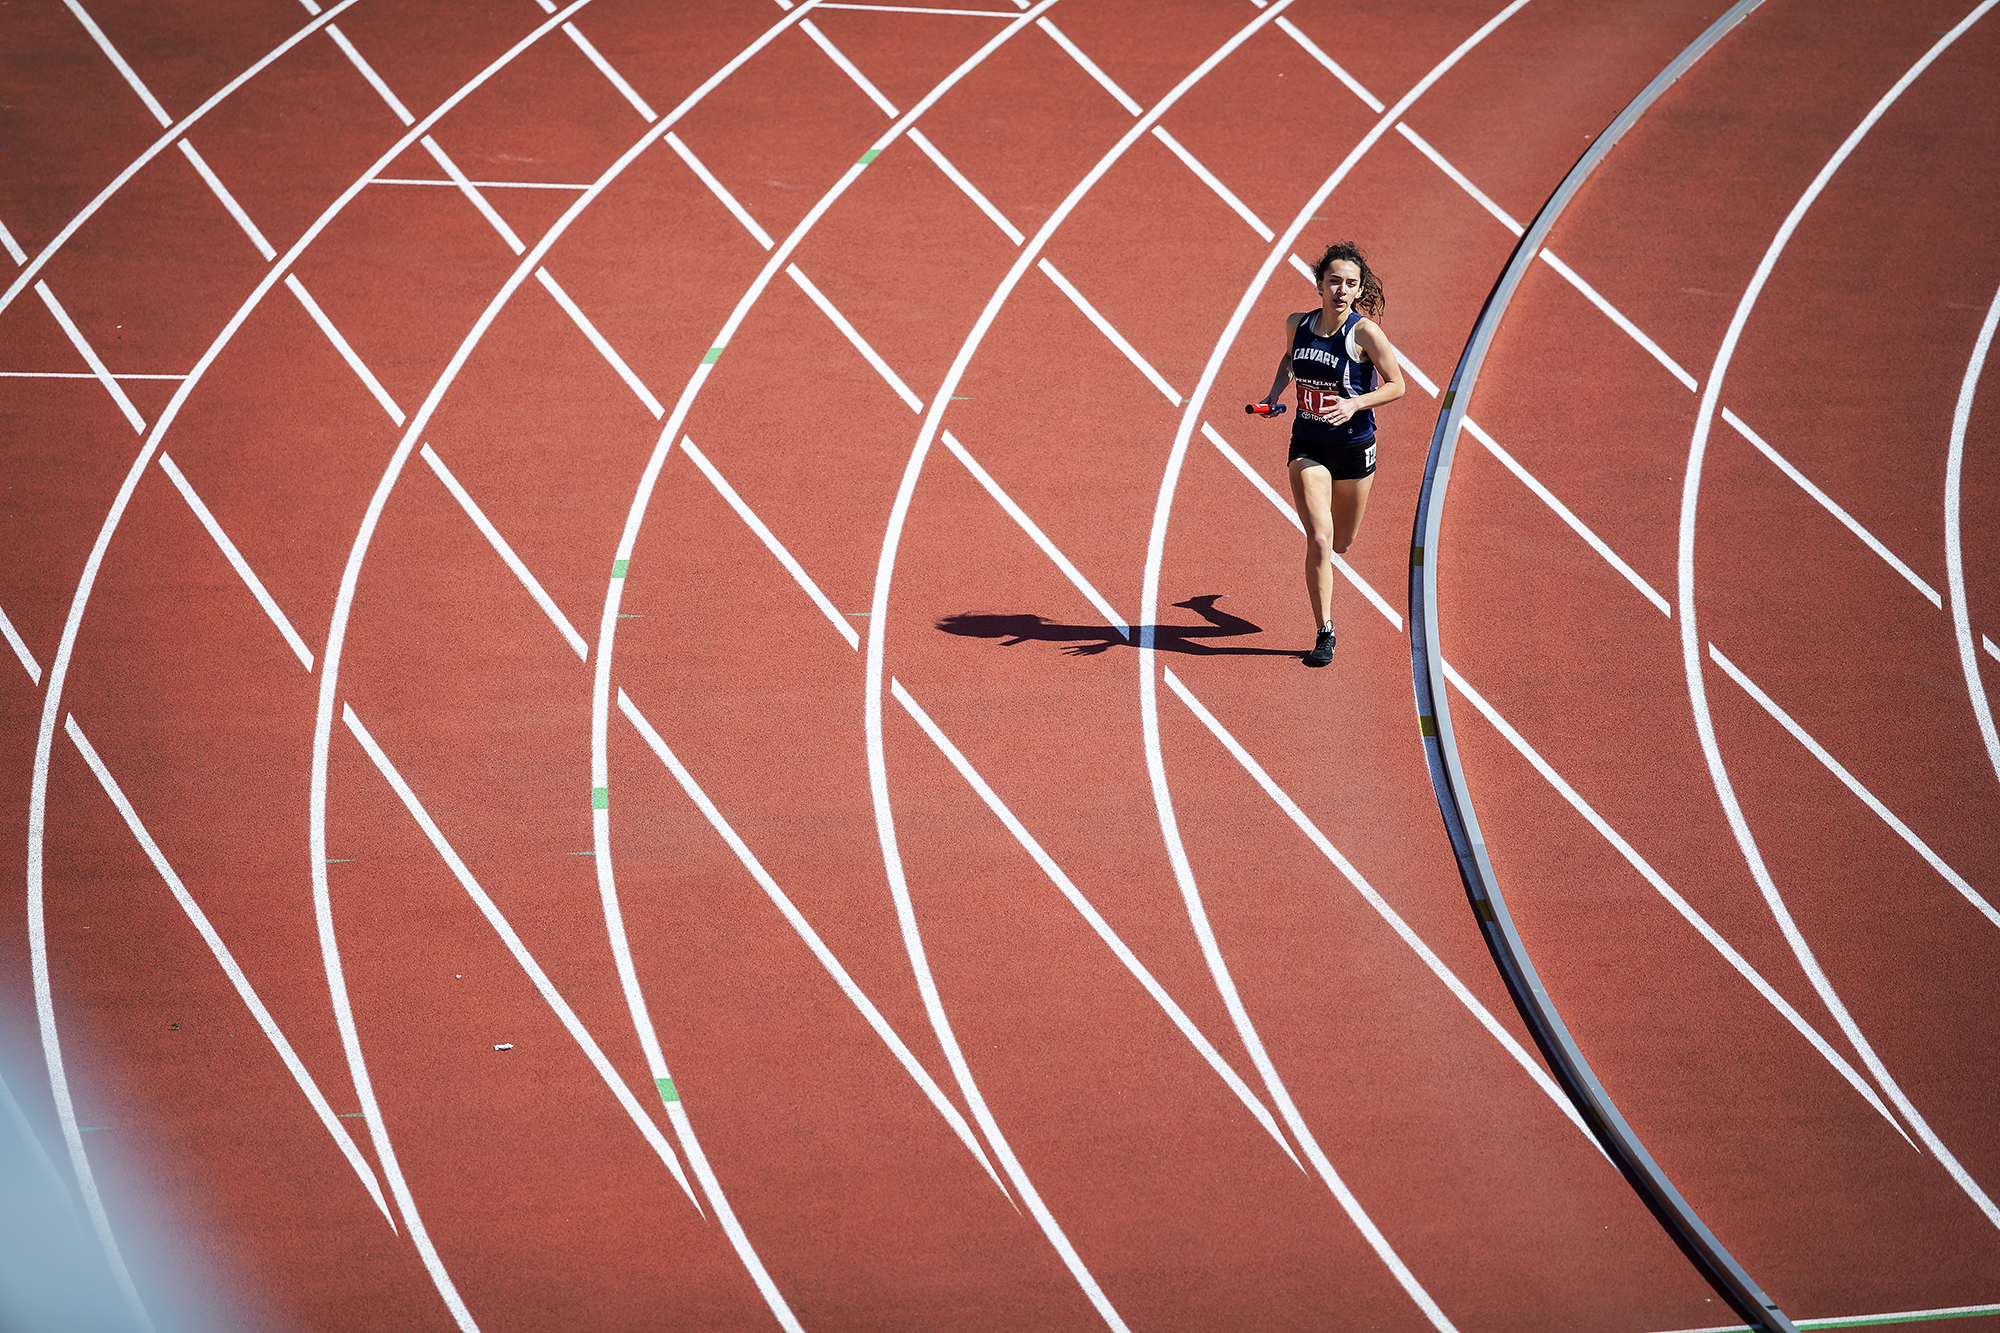 A solo runner running on a track.